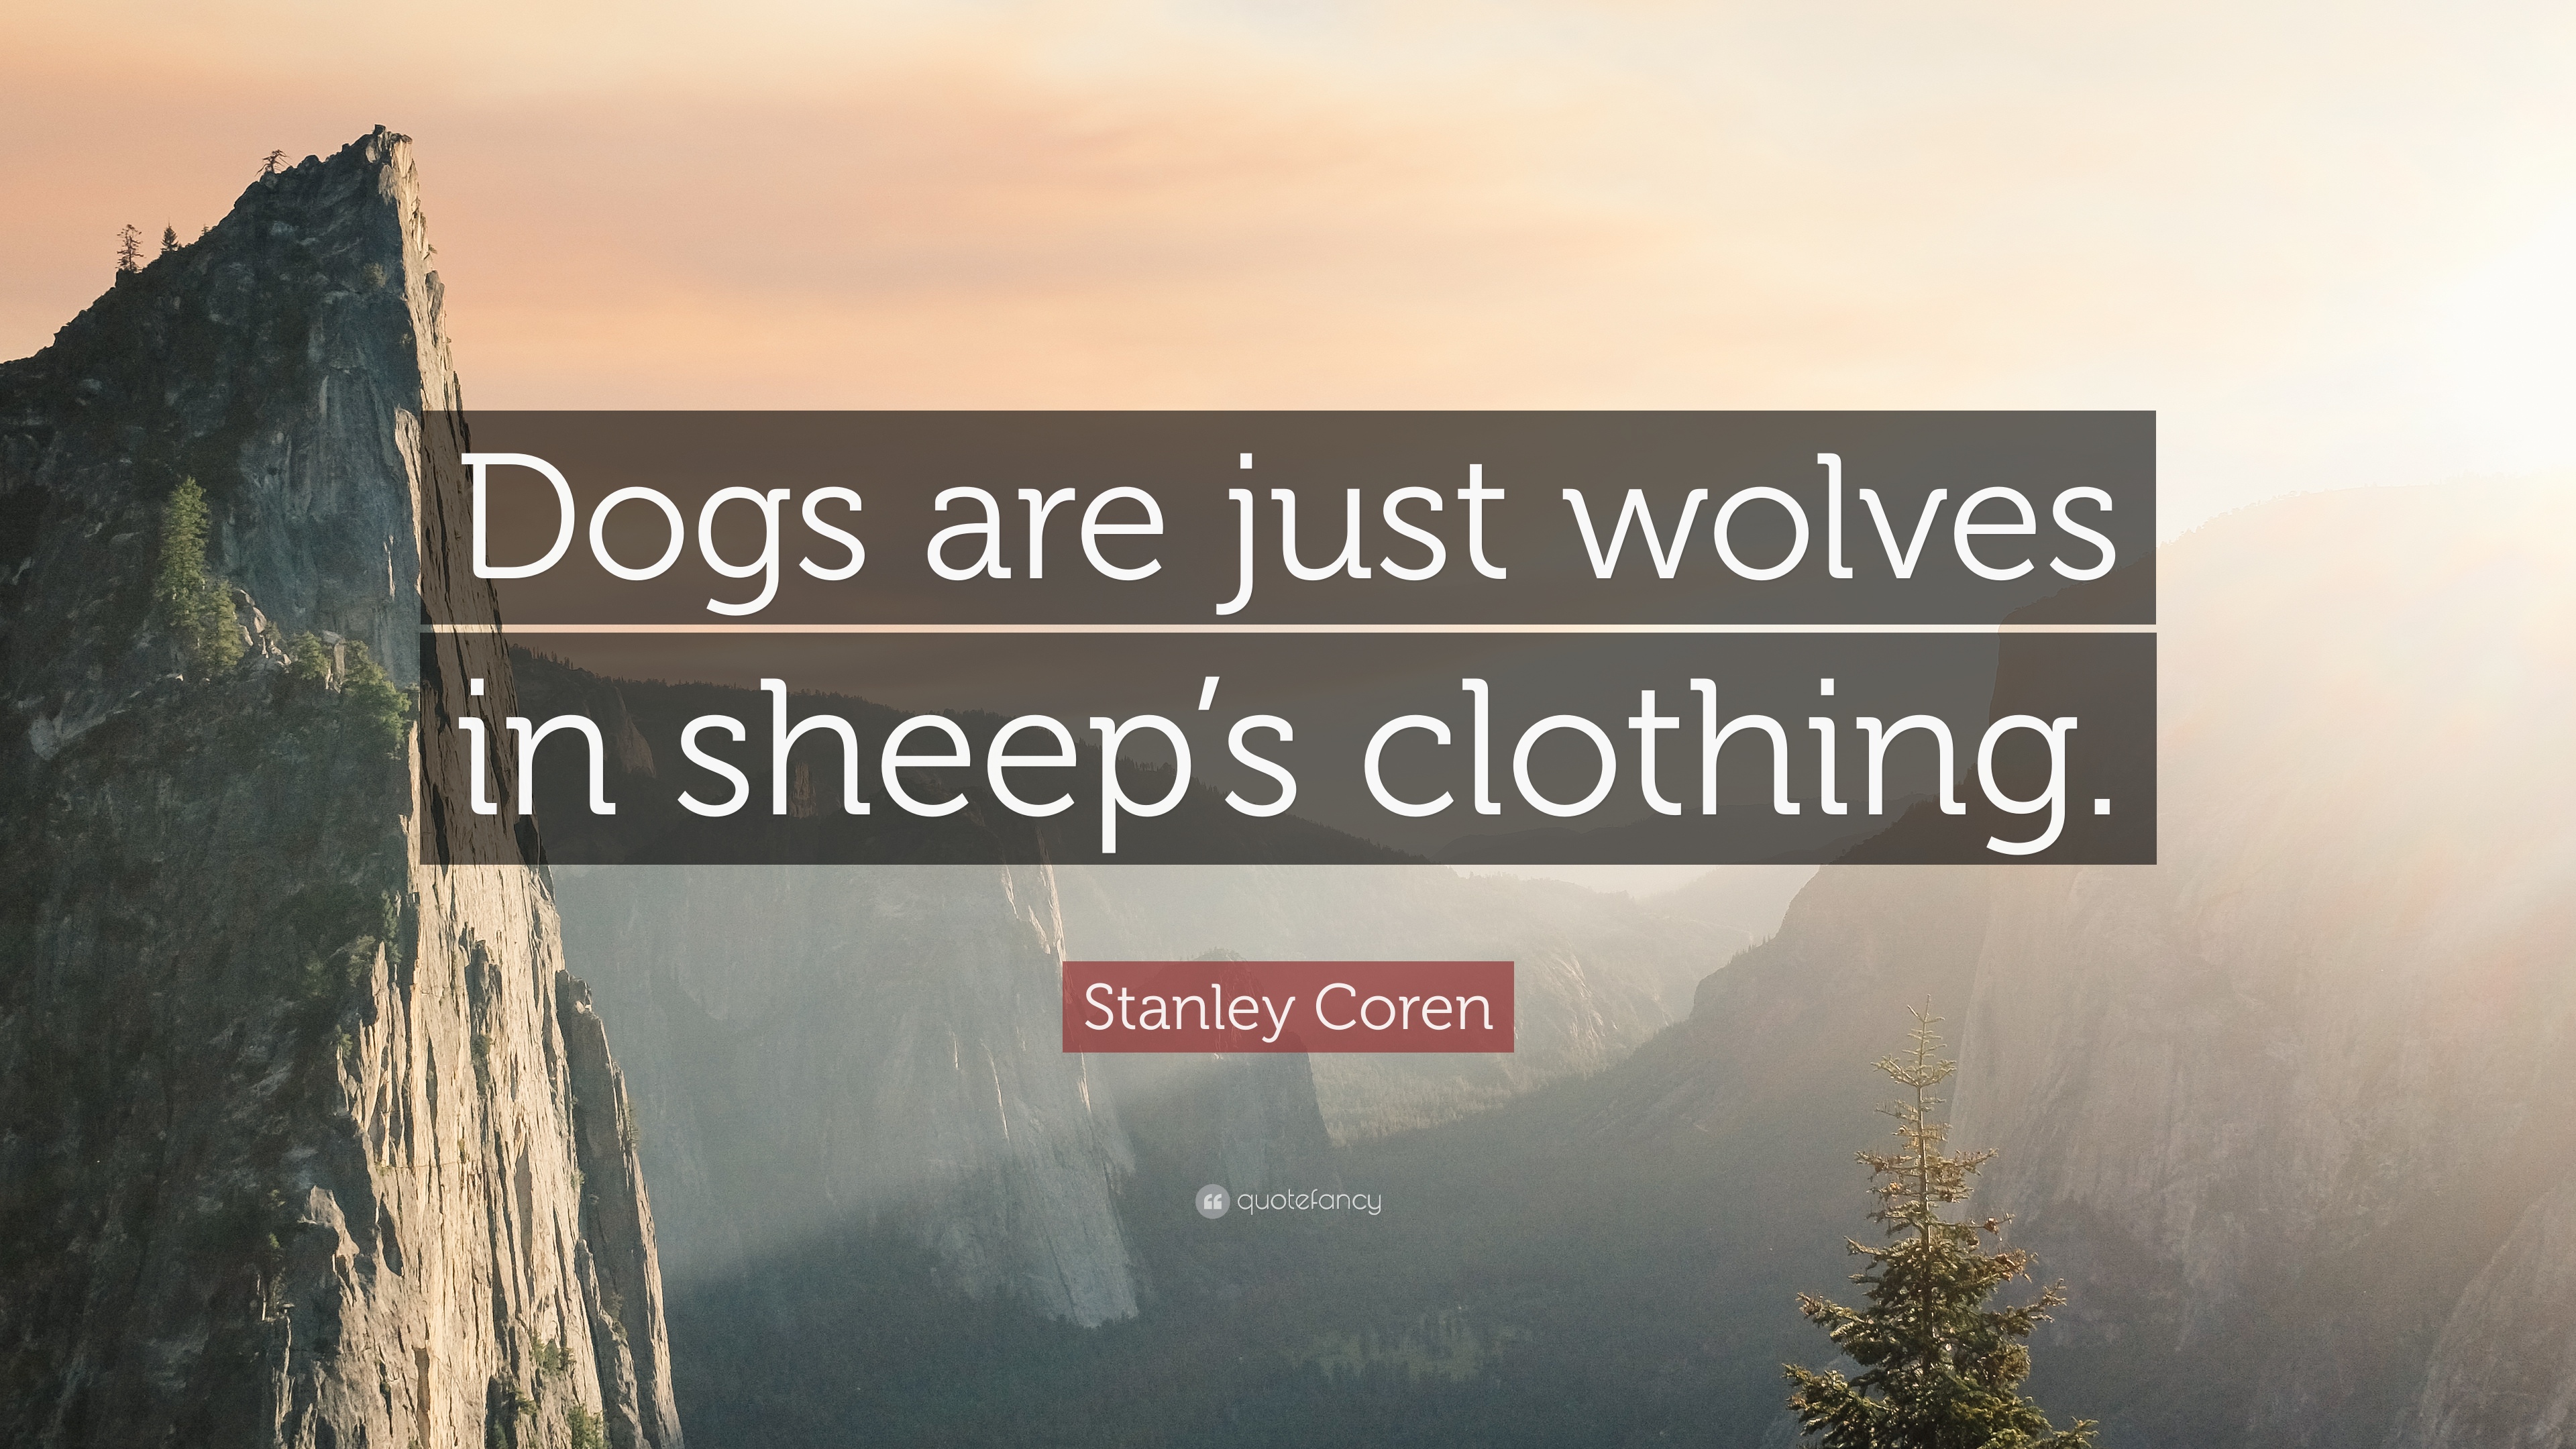 Stanley Coren Quote: “Dogs are just wolves in sheep's clothing.” 7